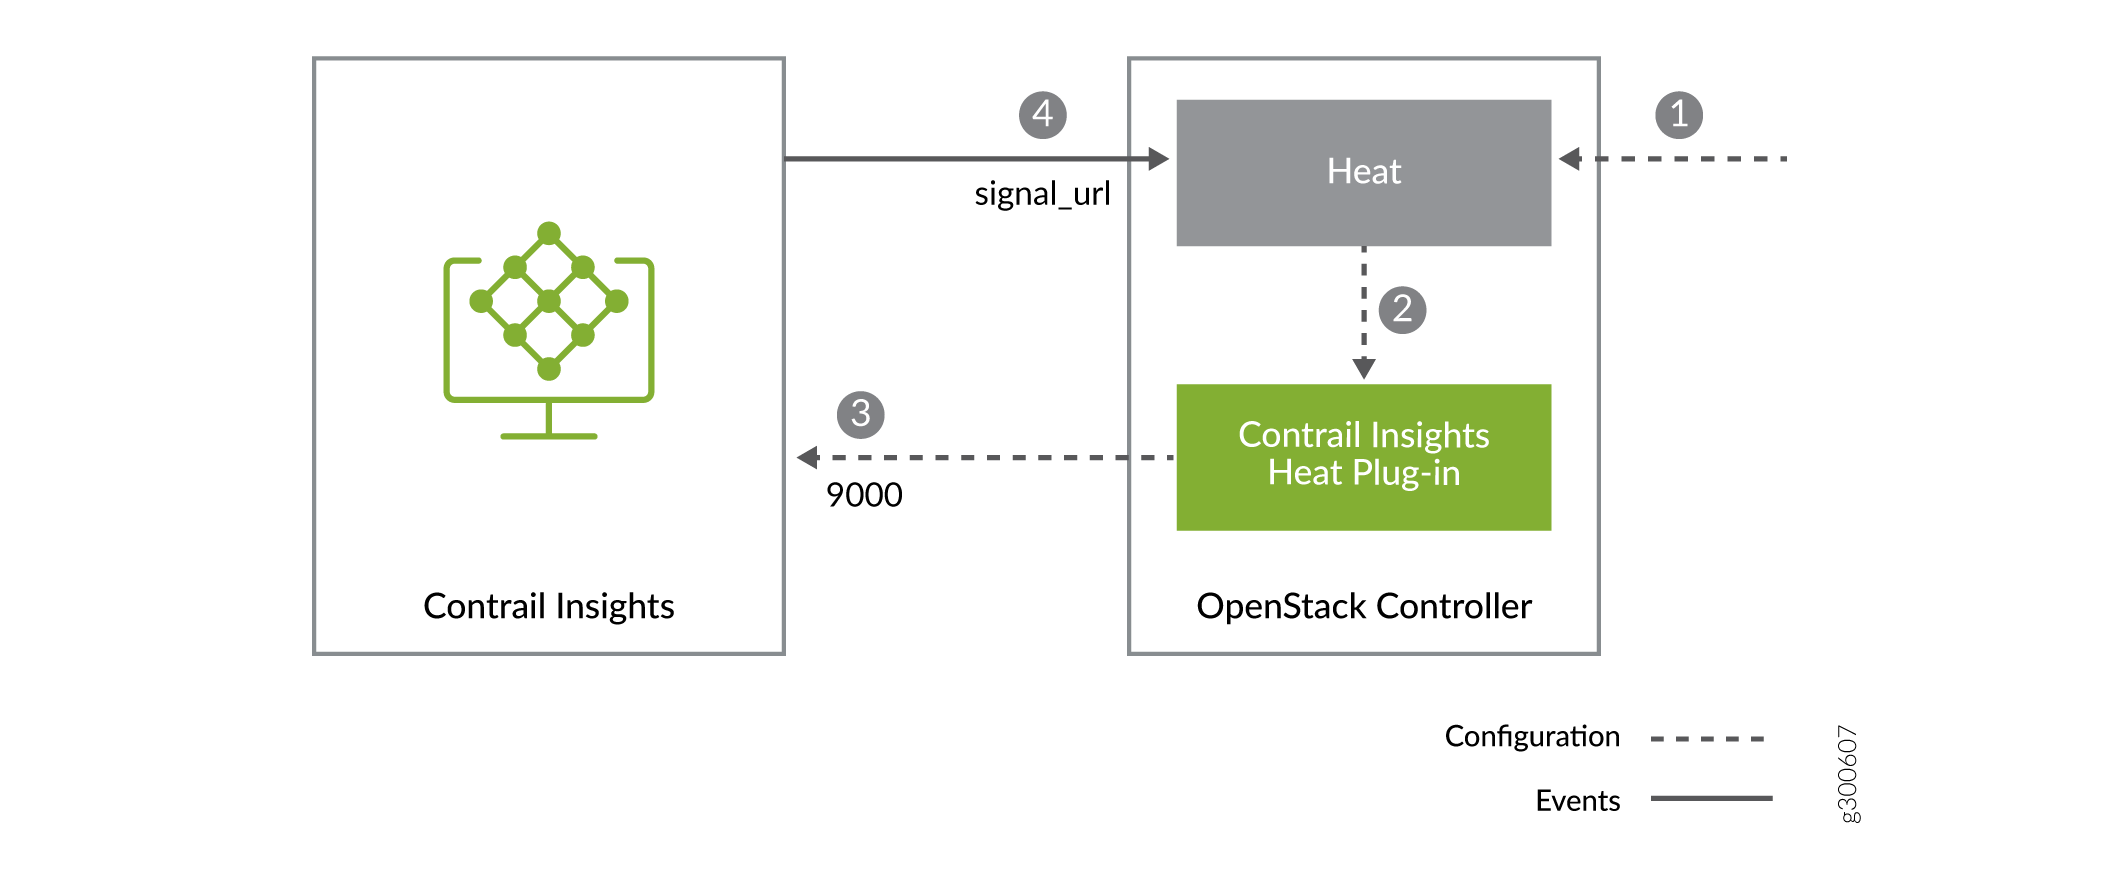 Interaction Sequence between Heat, Contrail Insights Heat Plug-In, and Contrail Insights Platform